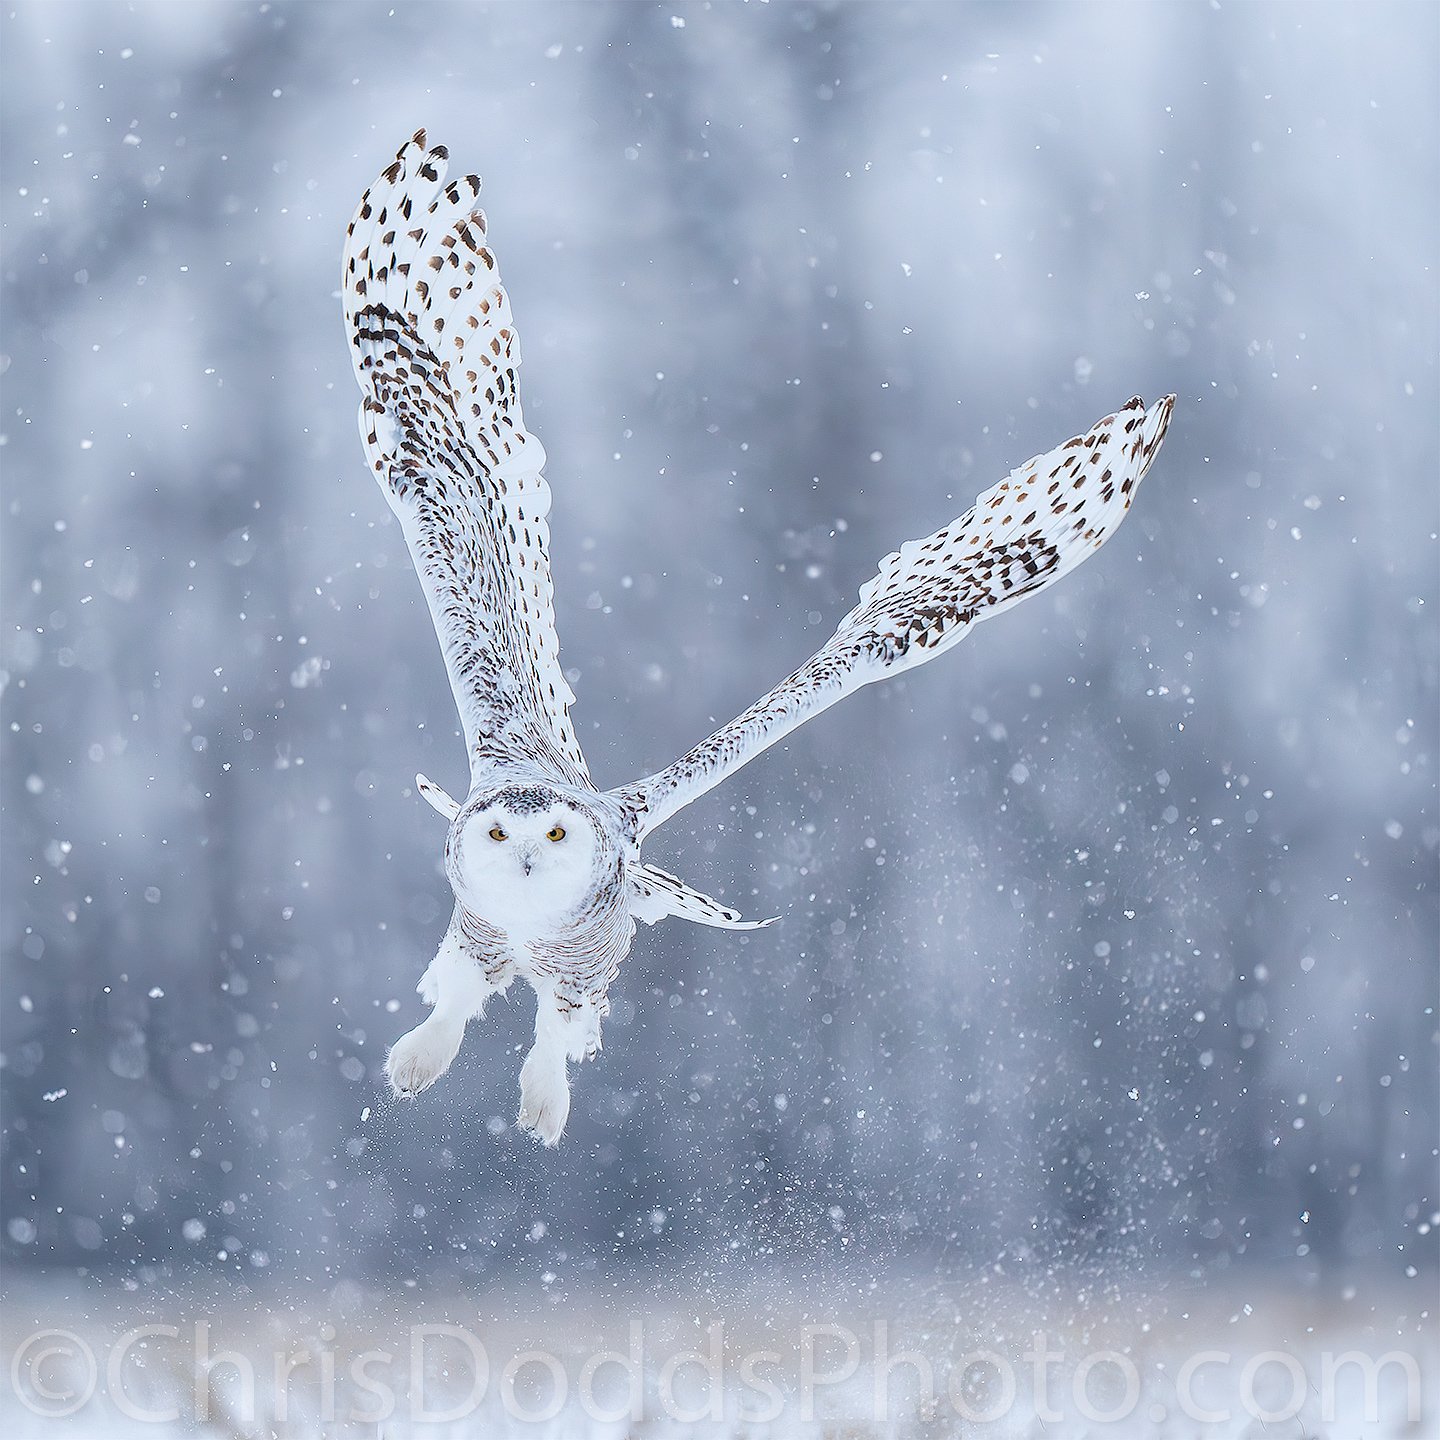 Snowy Owl SNOW SQUALL — Nature Photography Blog